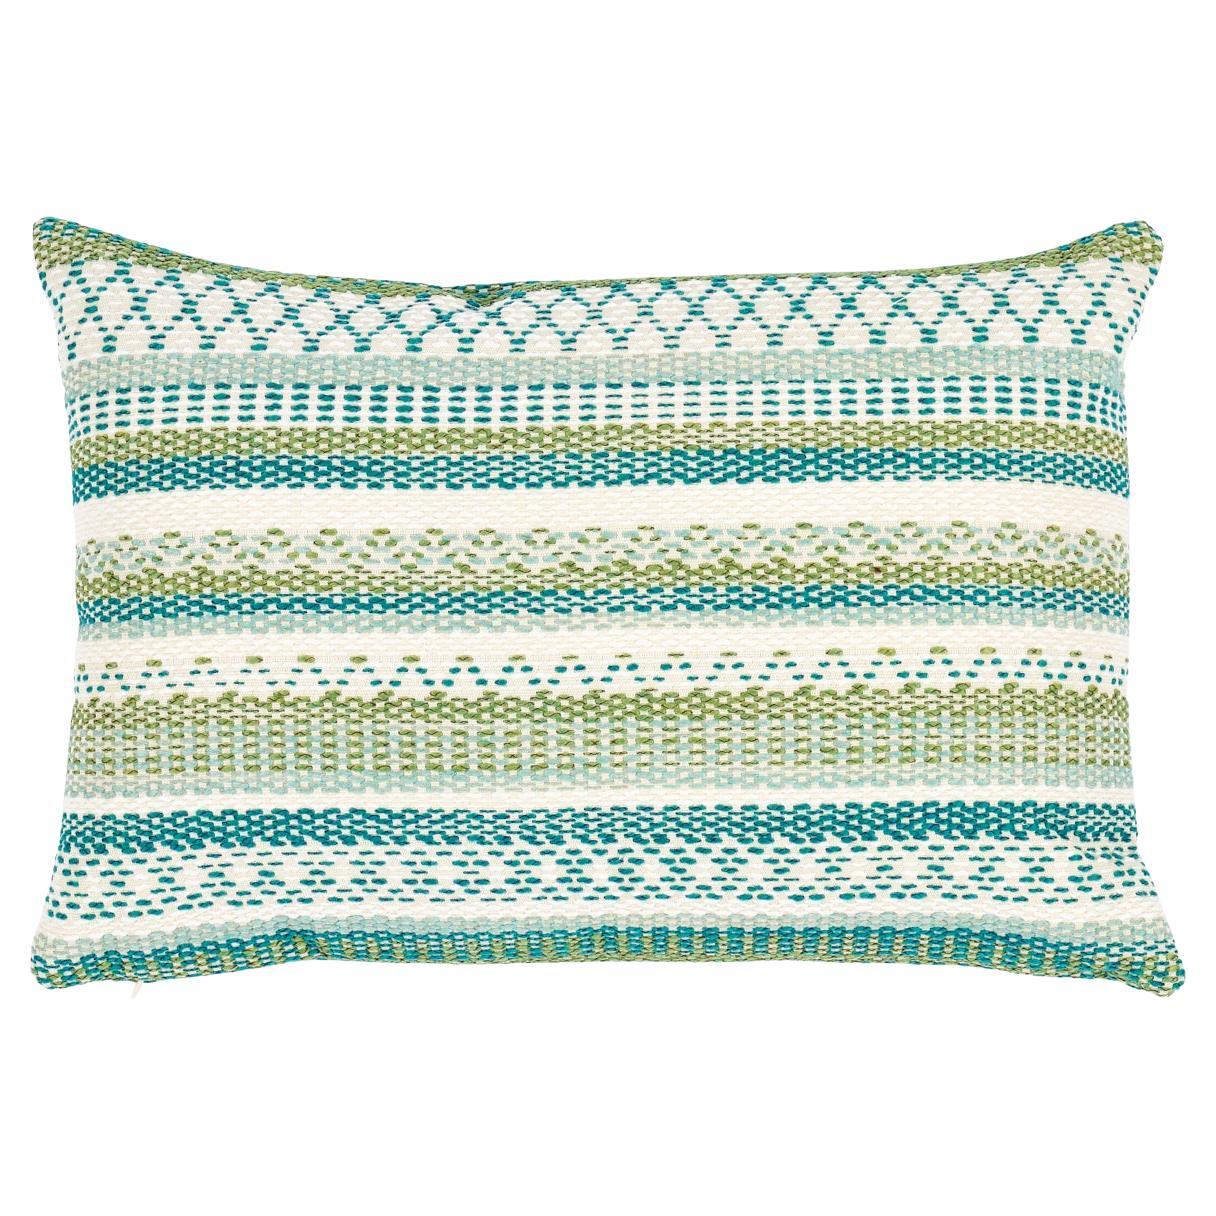 Schumacher Fremont I/O in Green 22" x 14" Pillow For Sale